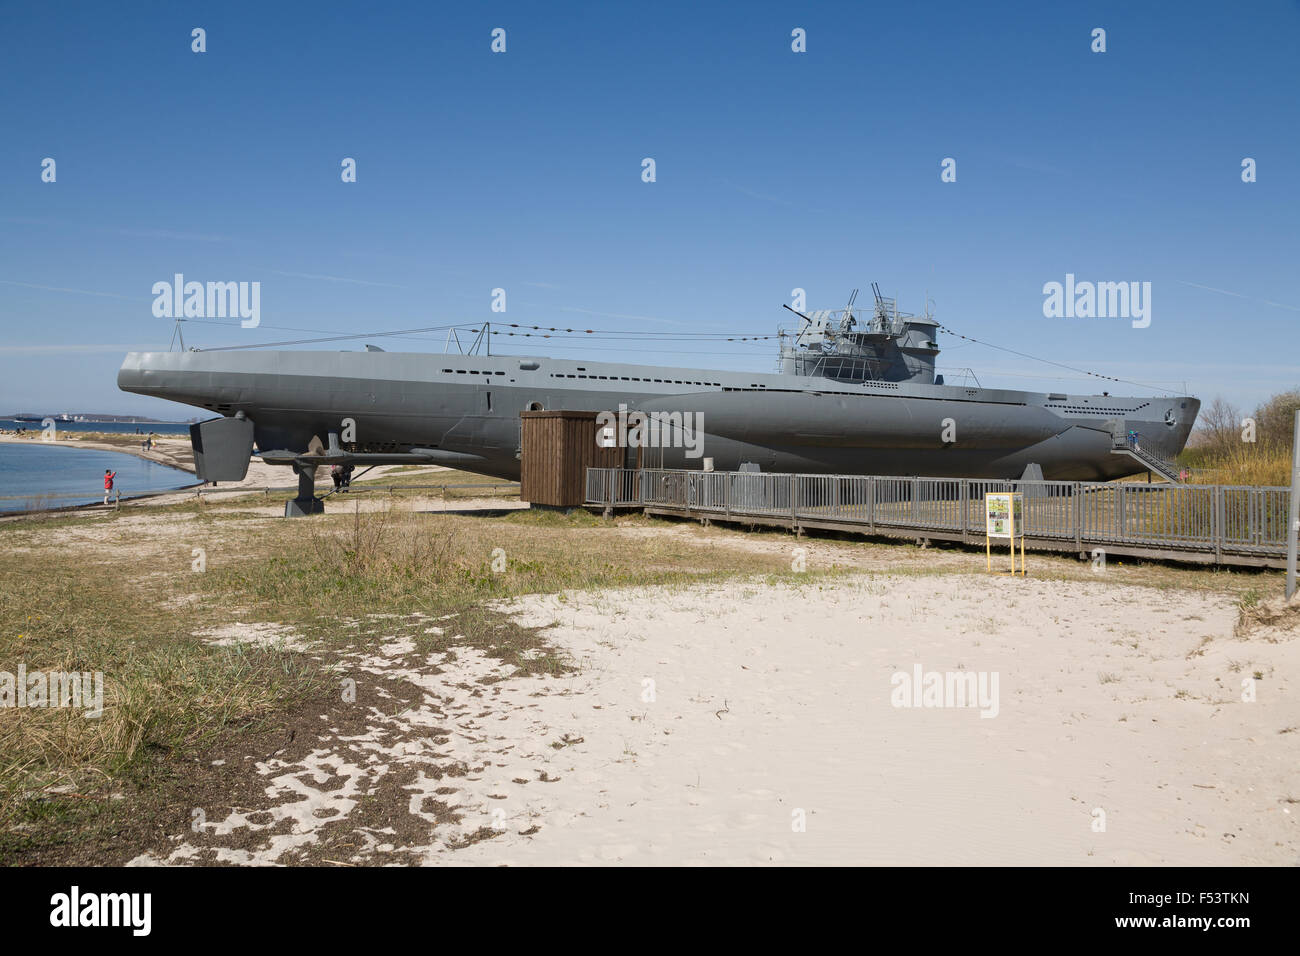 19.04.2015, Laboe, Schleswig-Holstein, Germany - The submarine U 995 as a museum ship at the foot of the Naval Monument in Laboe. U 995 is a method used in World War II German U-boat type VII C / 41 of the former Navy. It was put into service in September 1943 and completed nine patrols. After the war, U 995 went as a test and training boat KNM Kaura into the possession of the Royal Norwegian Navy. In 1965 the return to Germany, on 2 October 1971, the official handover, and since 13 March 1972 is the submarine as a museum ship at the foot of the Naval Monument in Laboe. Operators of the Techni Stock Photo